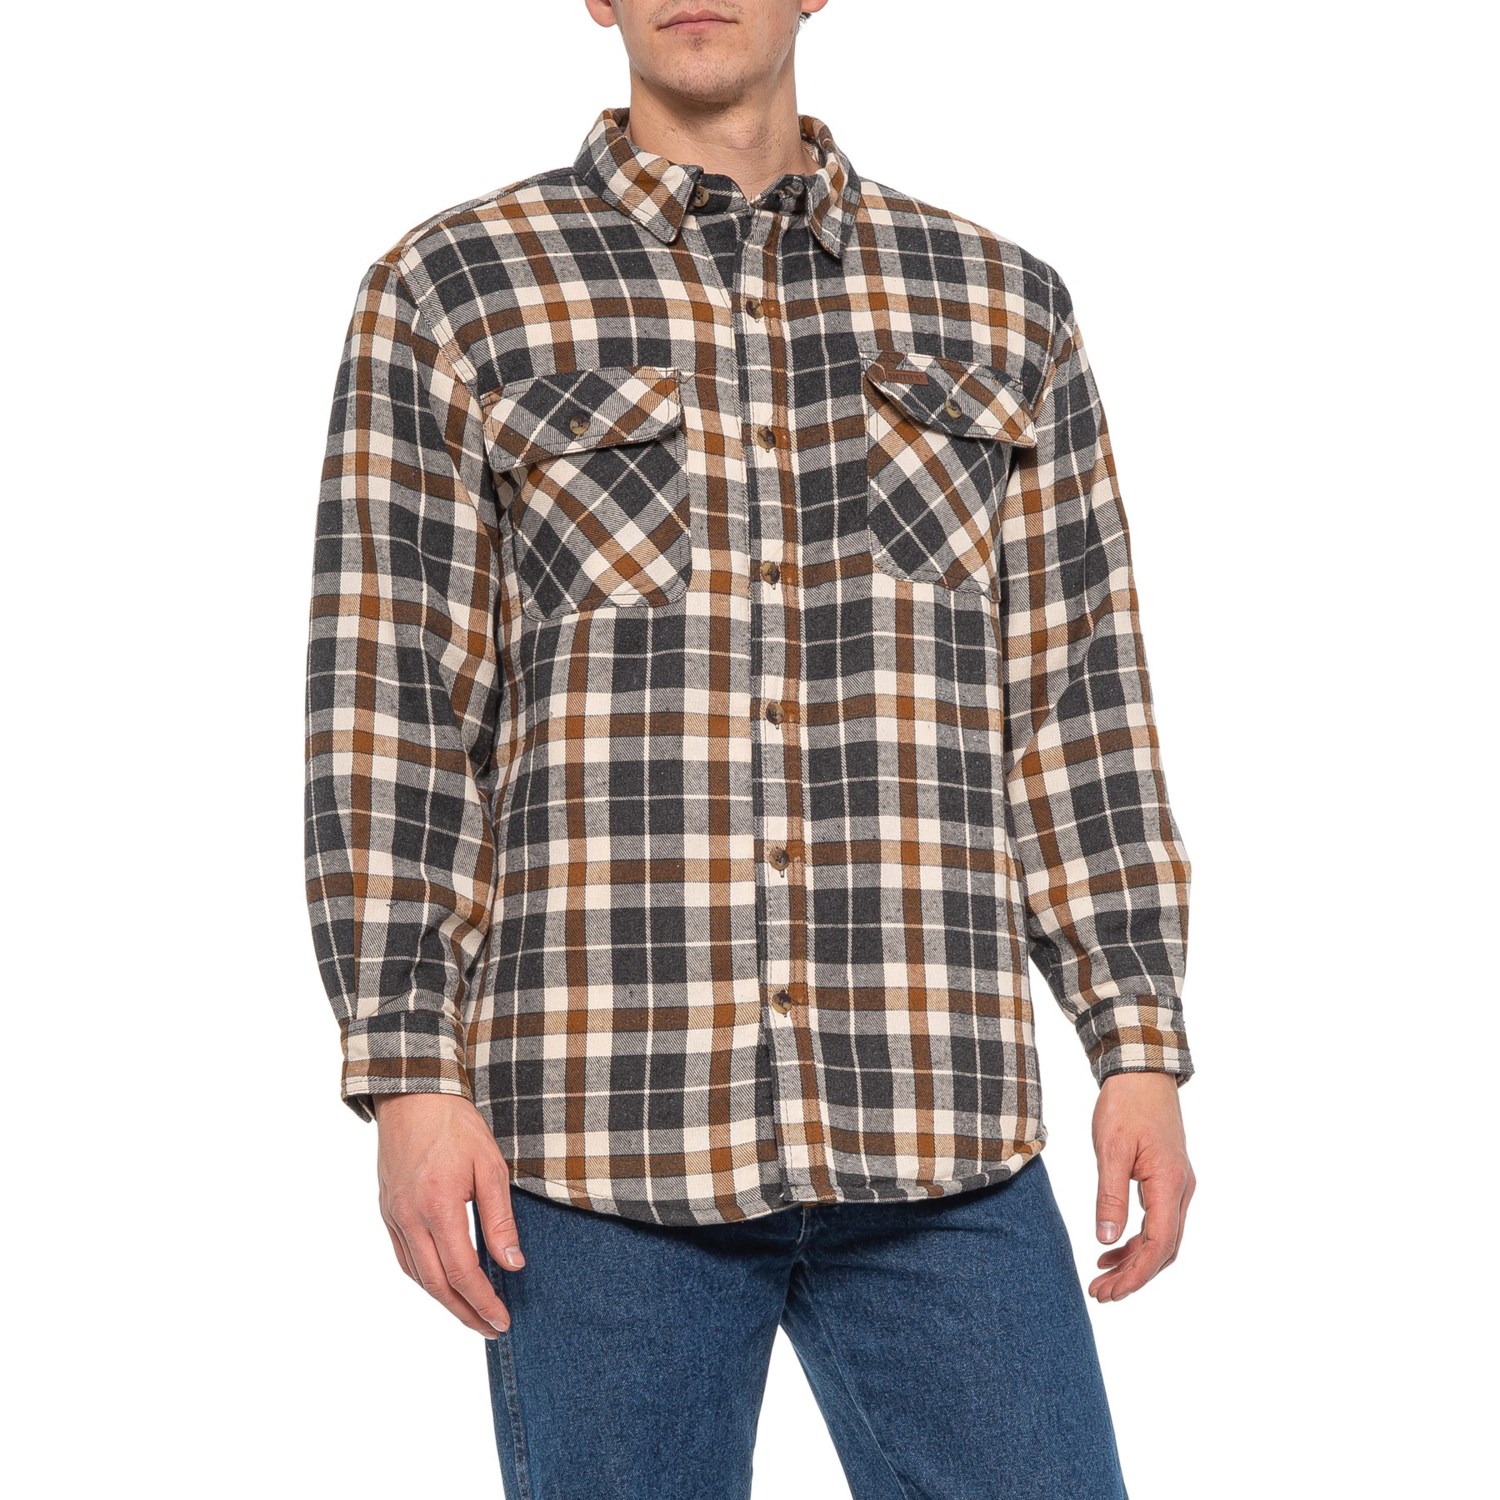 Smith's Workwear Flannel Shirt Jacket (For Men) - Save 60%